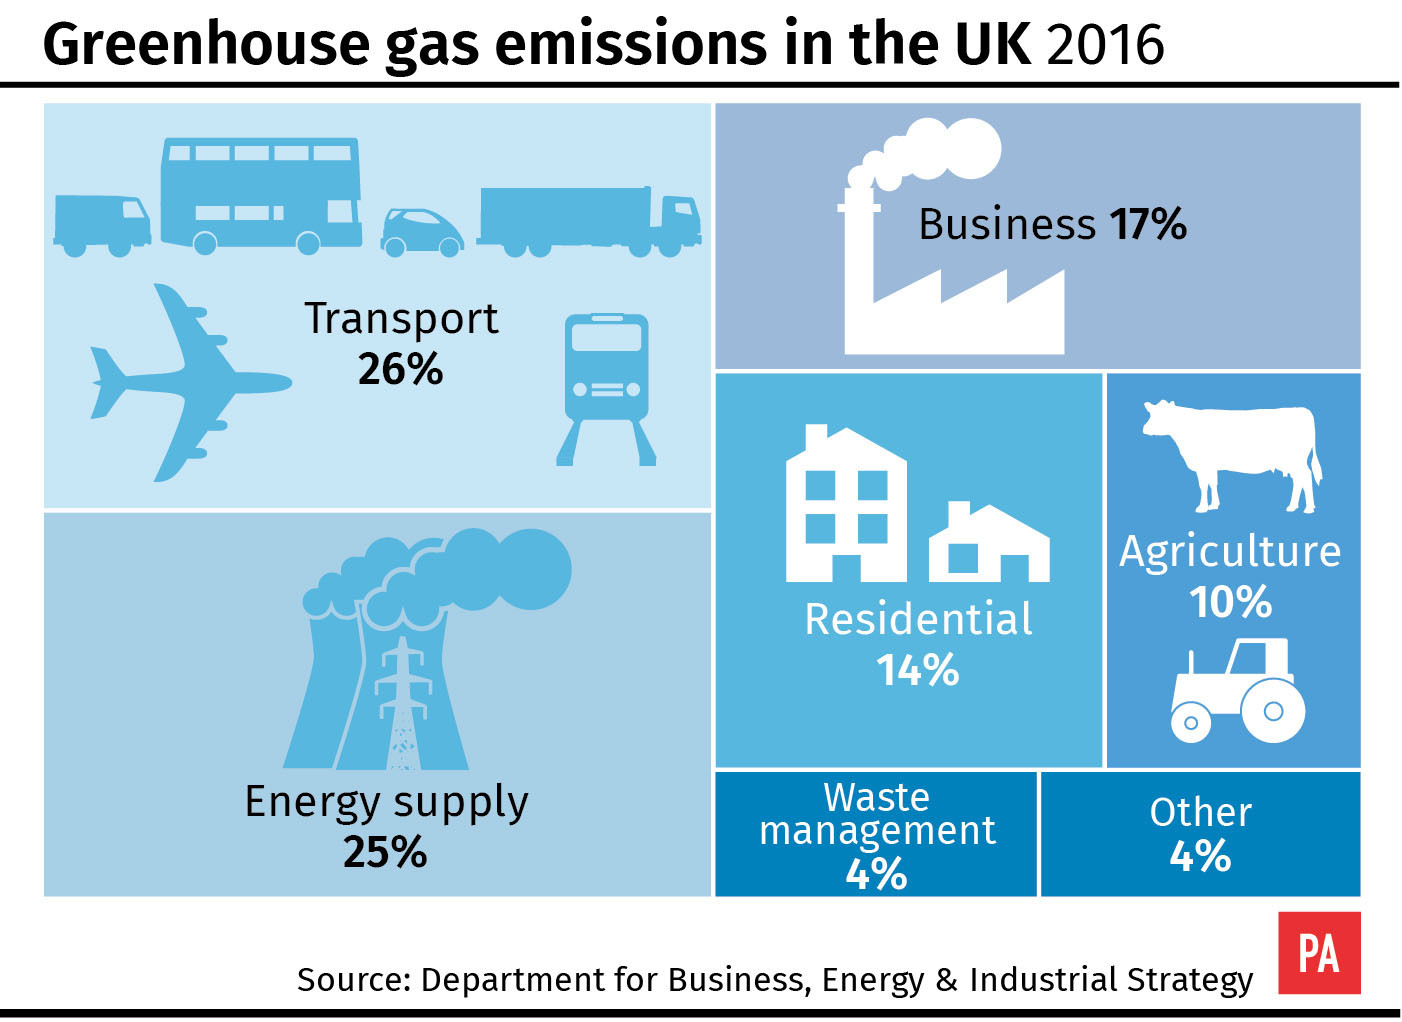 Greenhouse gas emissions by sector in the UK 2016